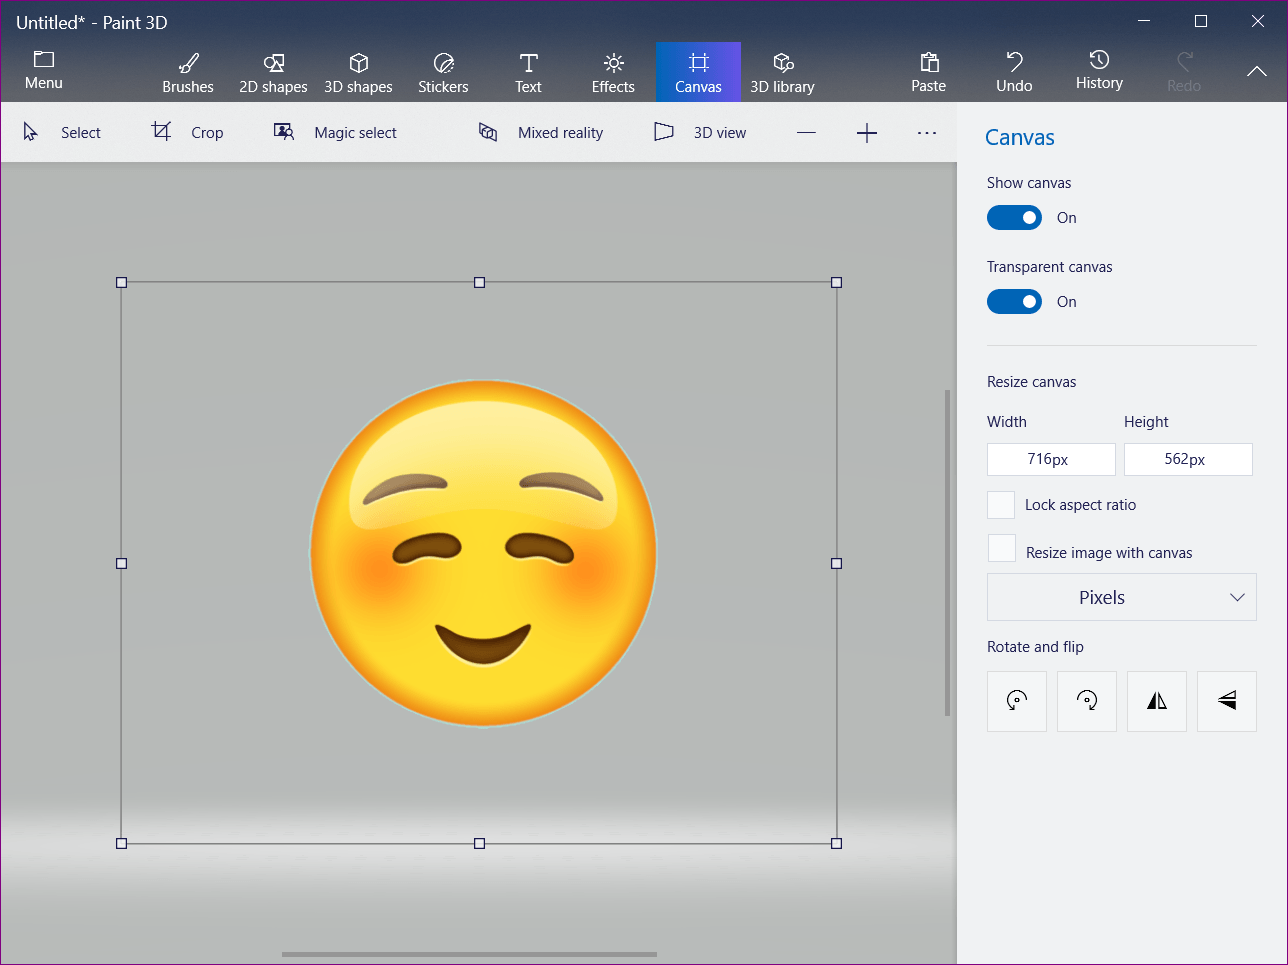 How to Make Background Transparent in Paint 3D.